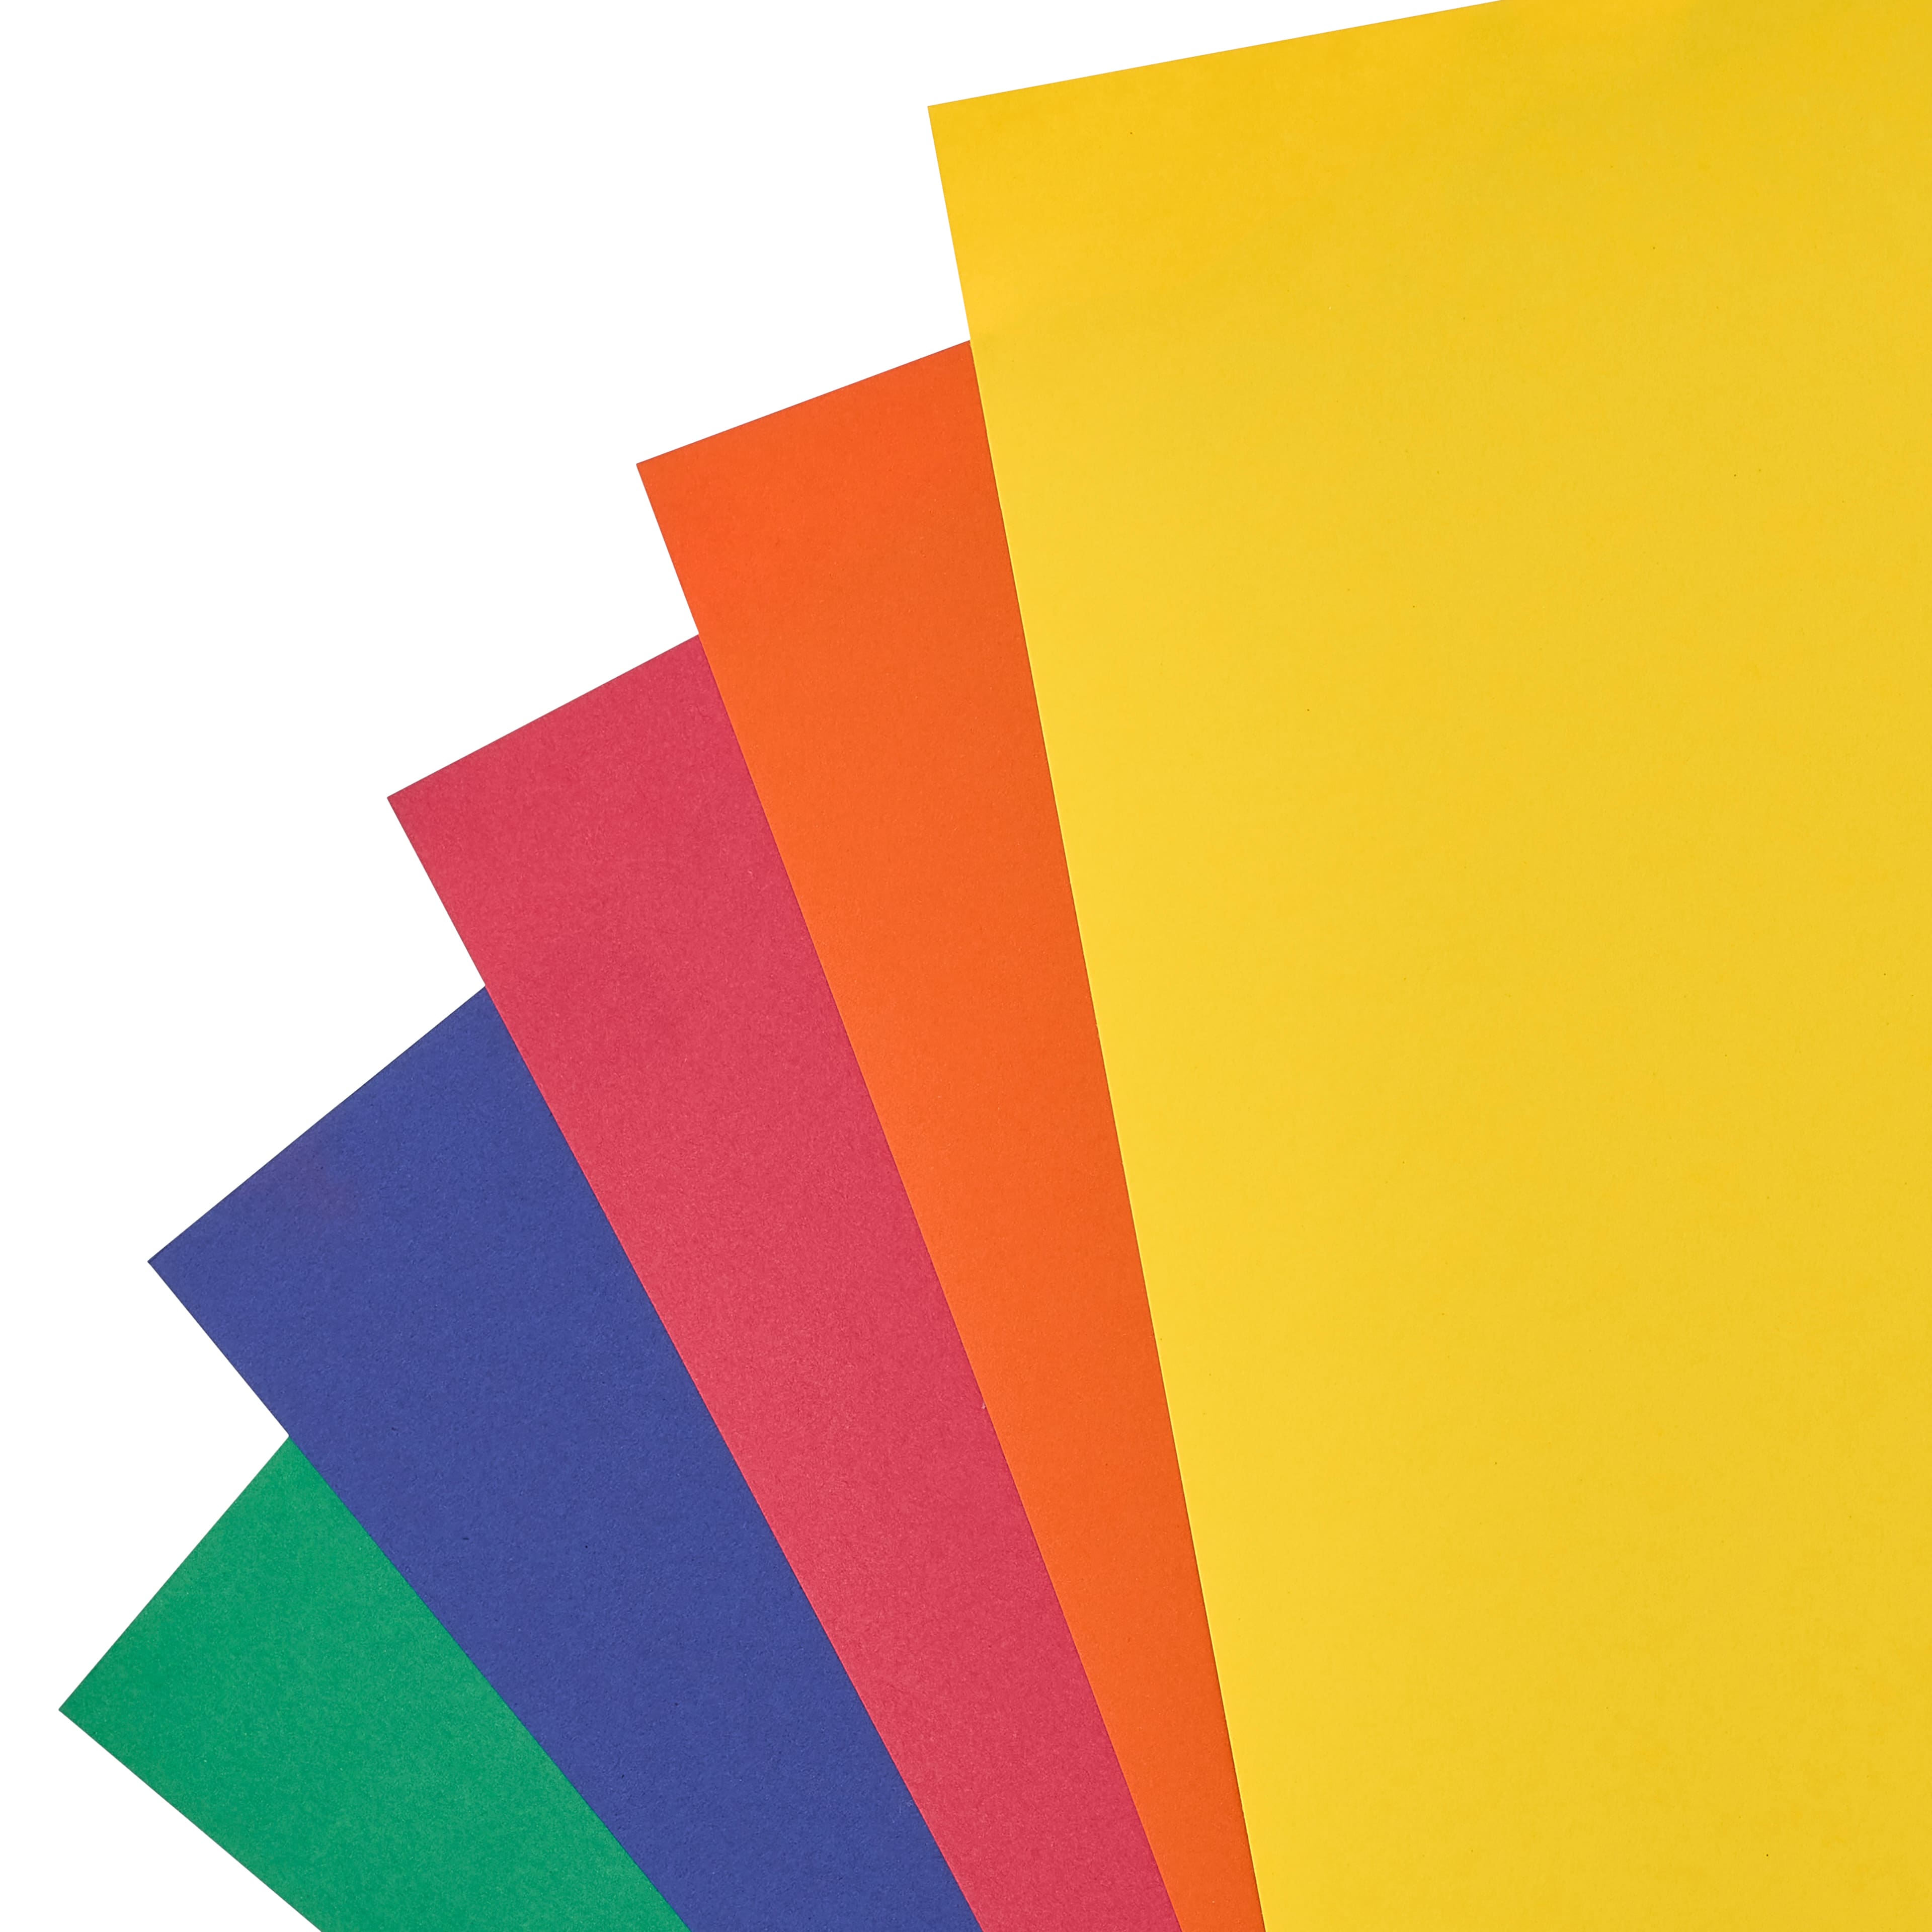 Recollections Cardstock Paper 8 1/2 x 11 Primary Colors - 50 Sheets